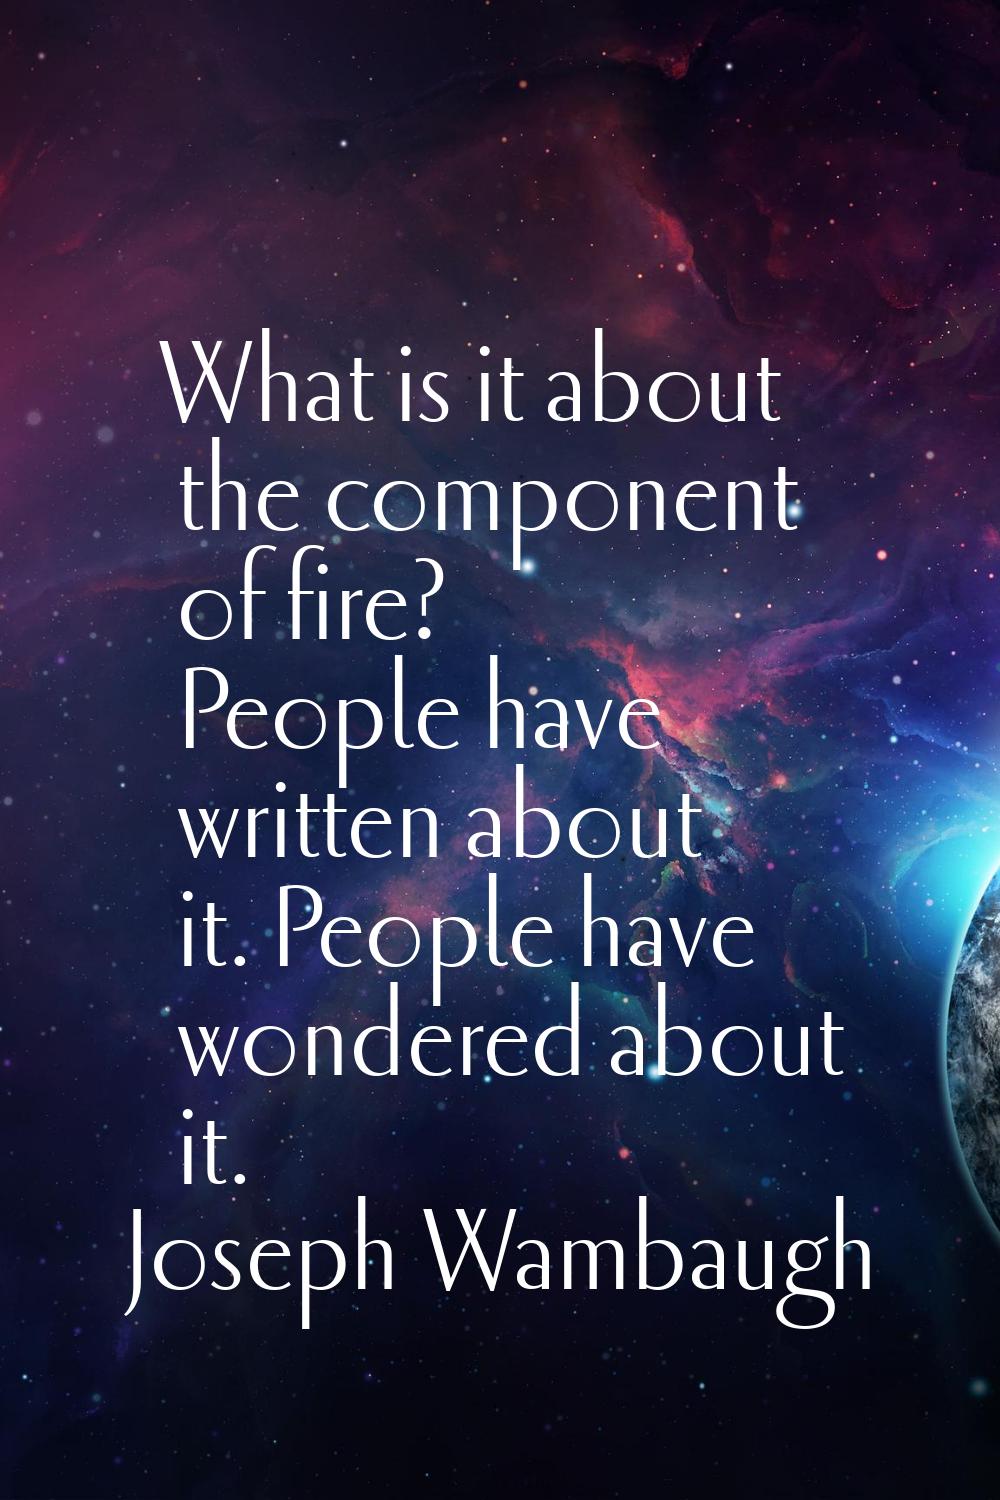 What is it about the component of fire? People have written about it. People have wondered about it